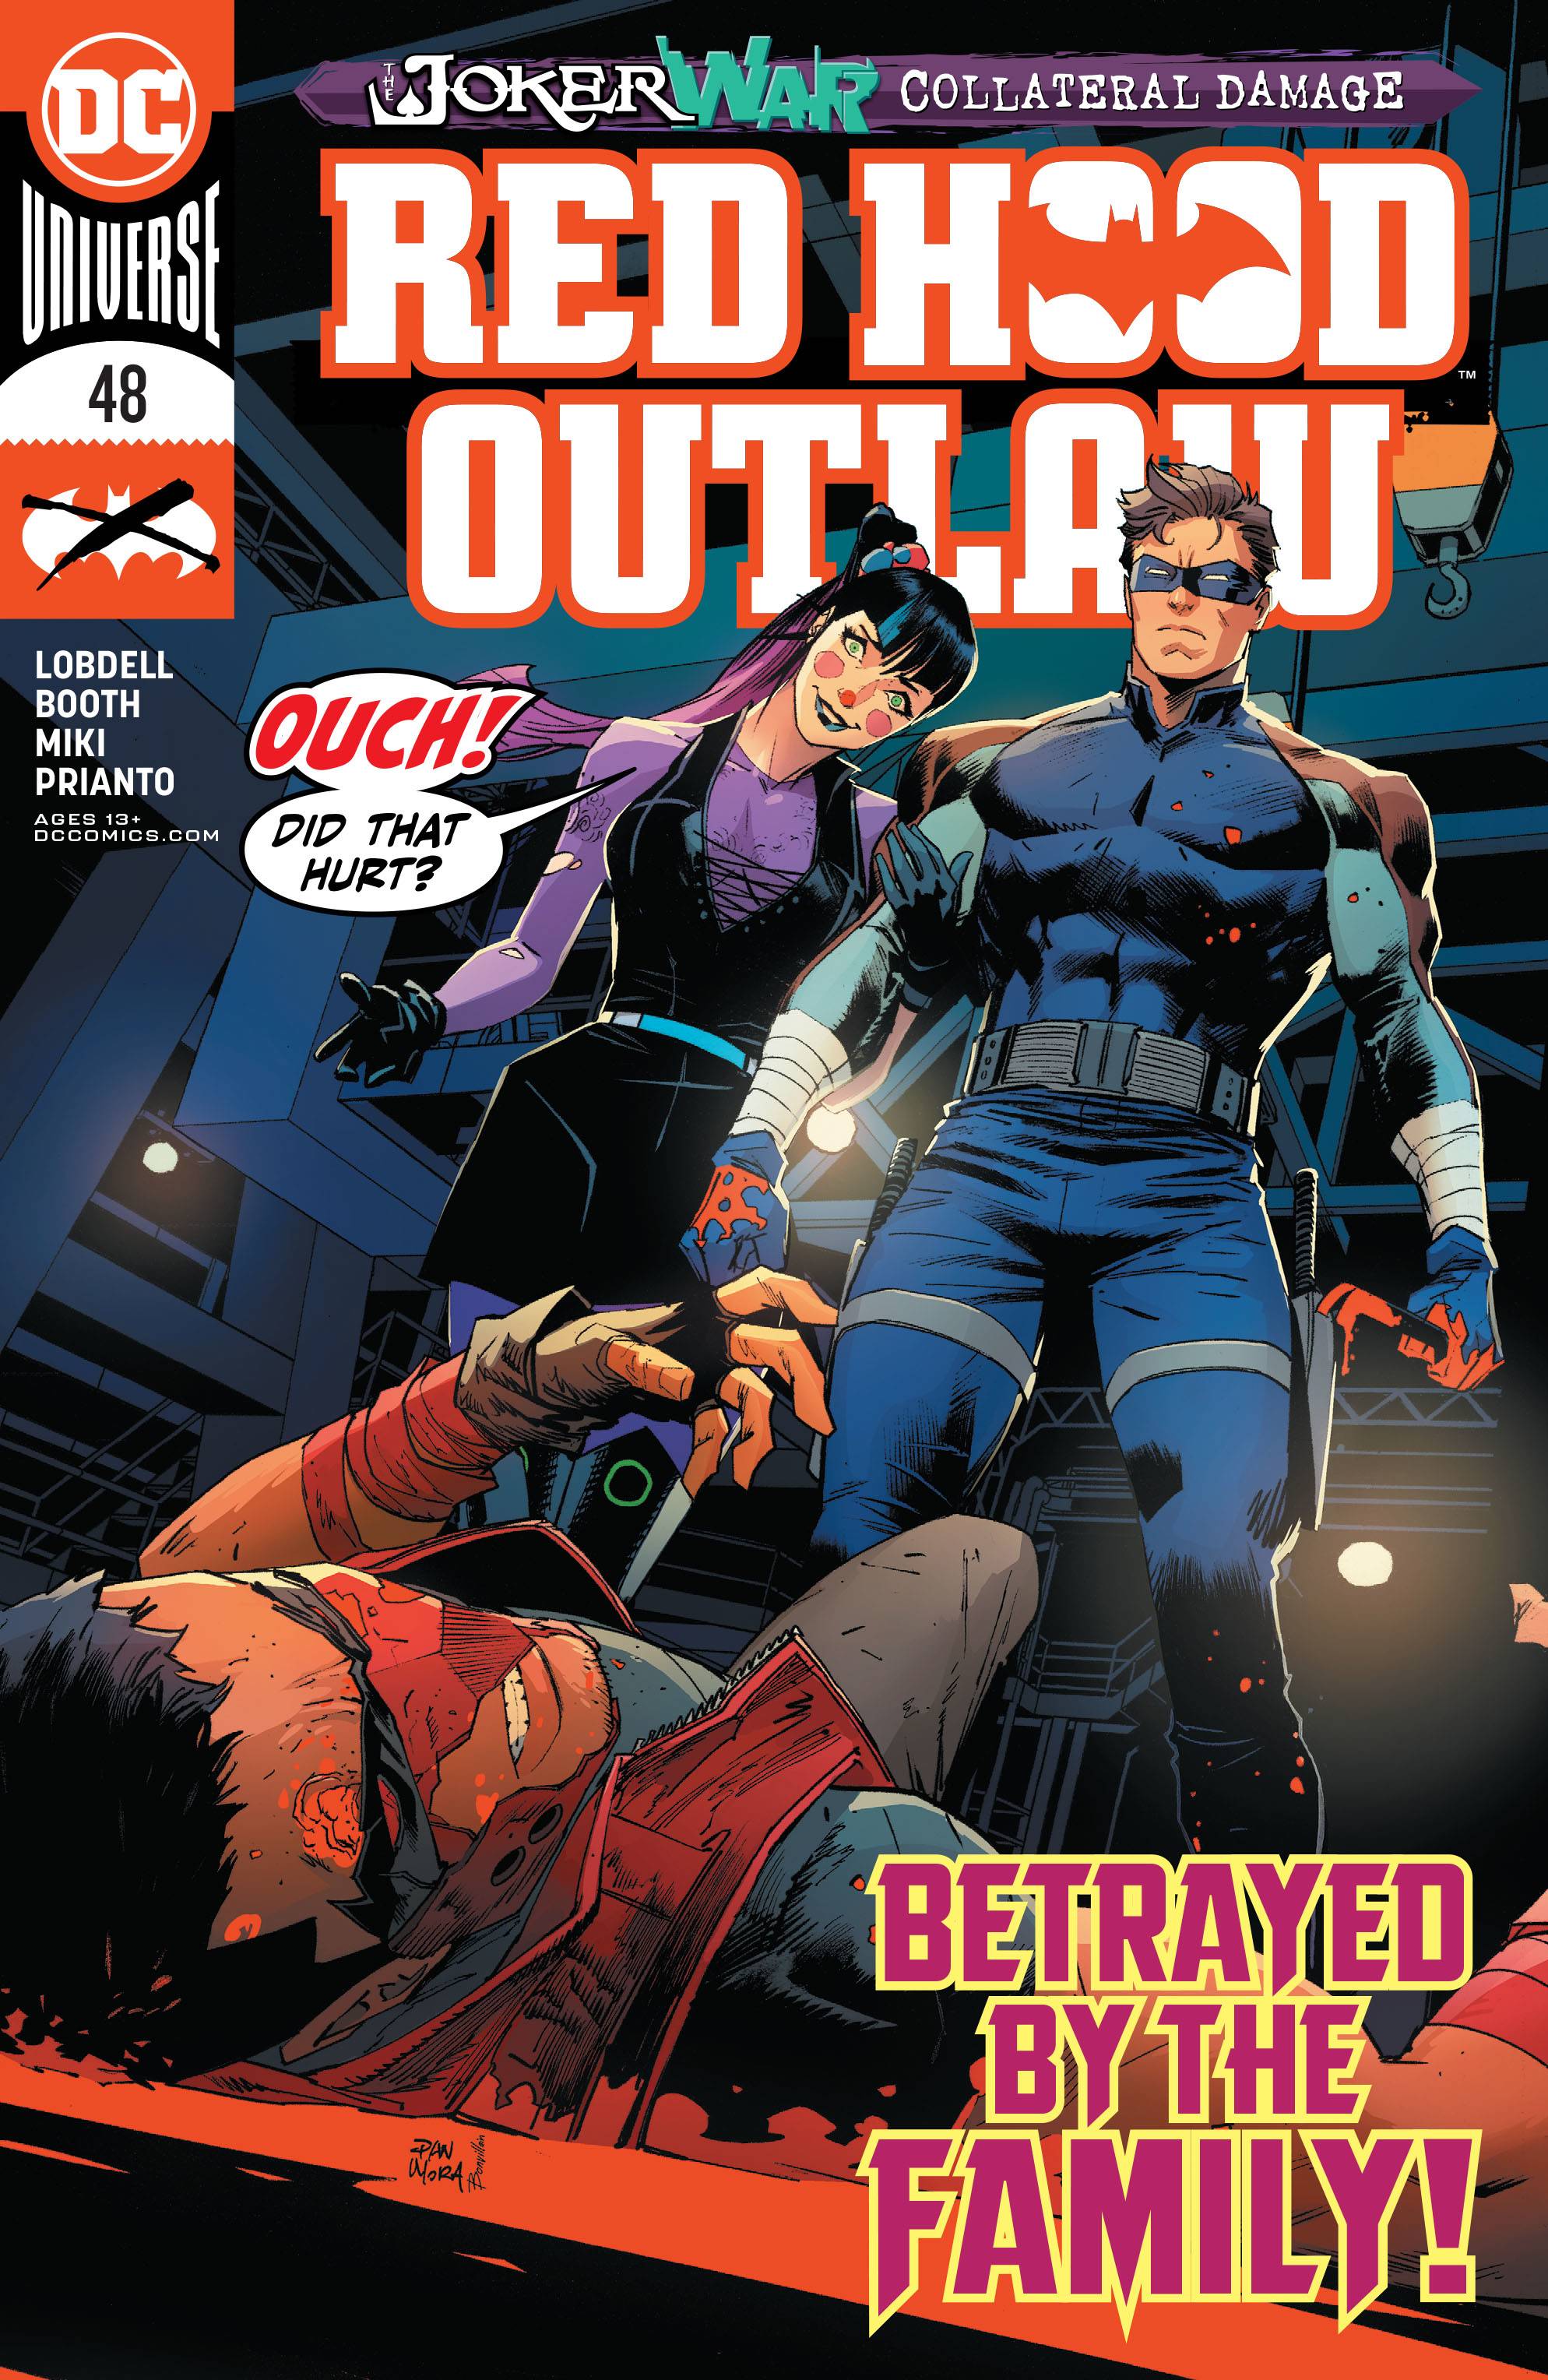 RED HOOD OUTLAW #48 | L.A. Mood Comics and Games